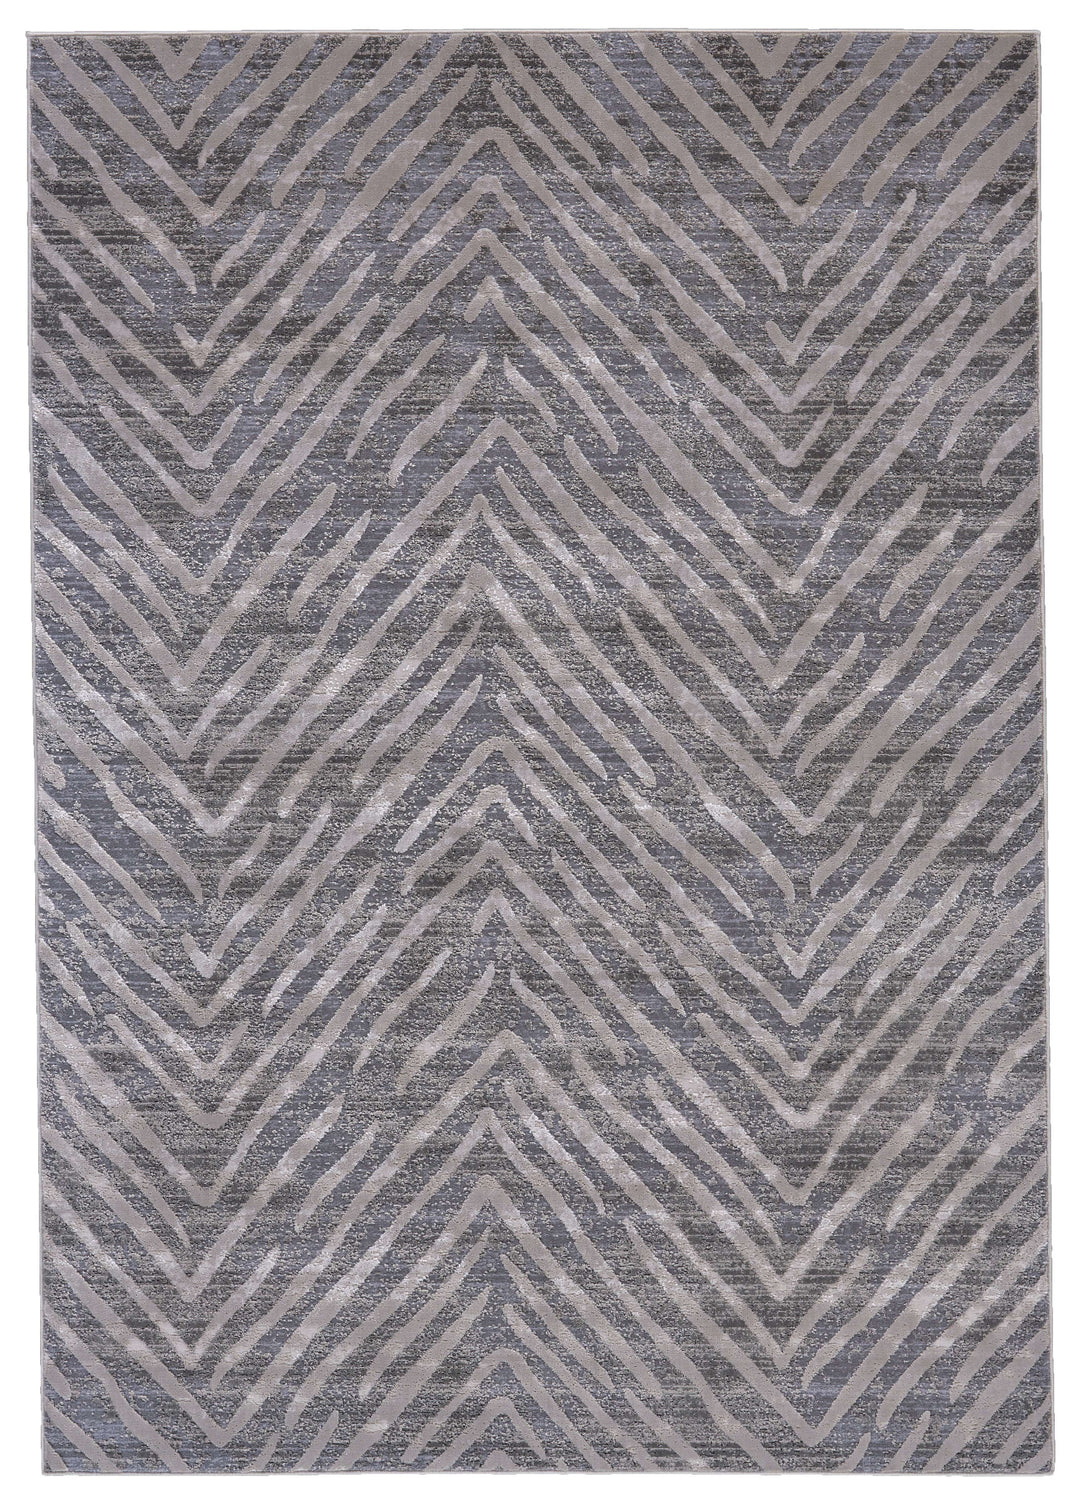 Feizy Feizy Waldor Distressed Metallic Chevron Rug - Available in 5 Sizes - Stormy & Opal Gray 5' x 8' 7353968FGRY000E10